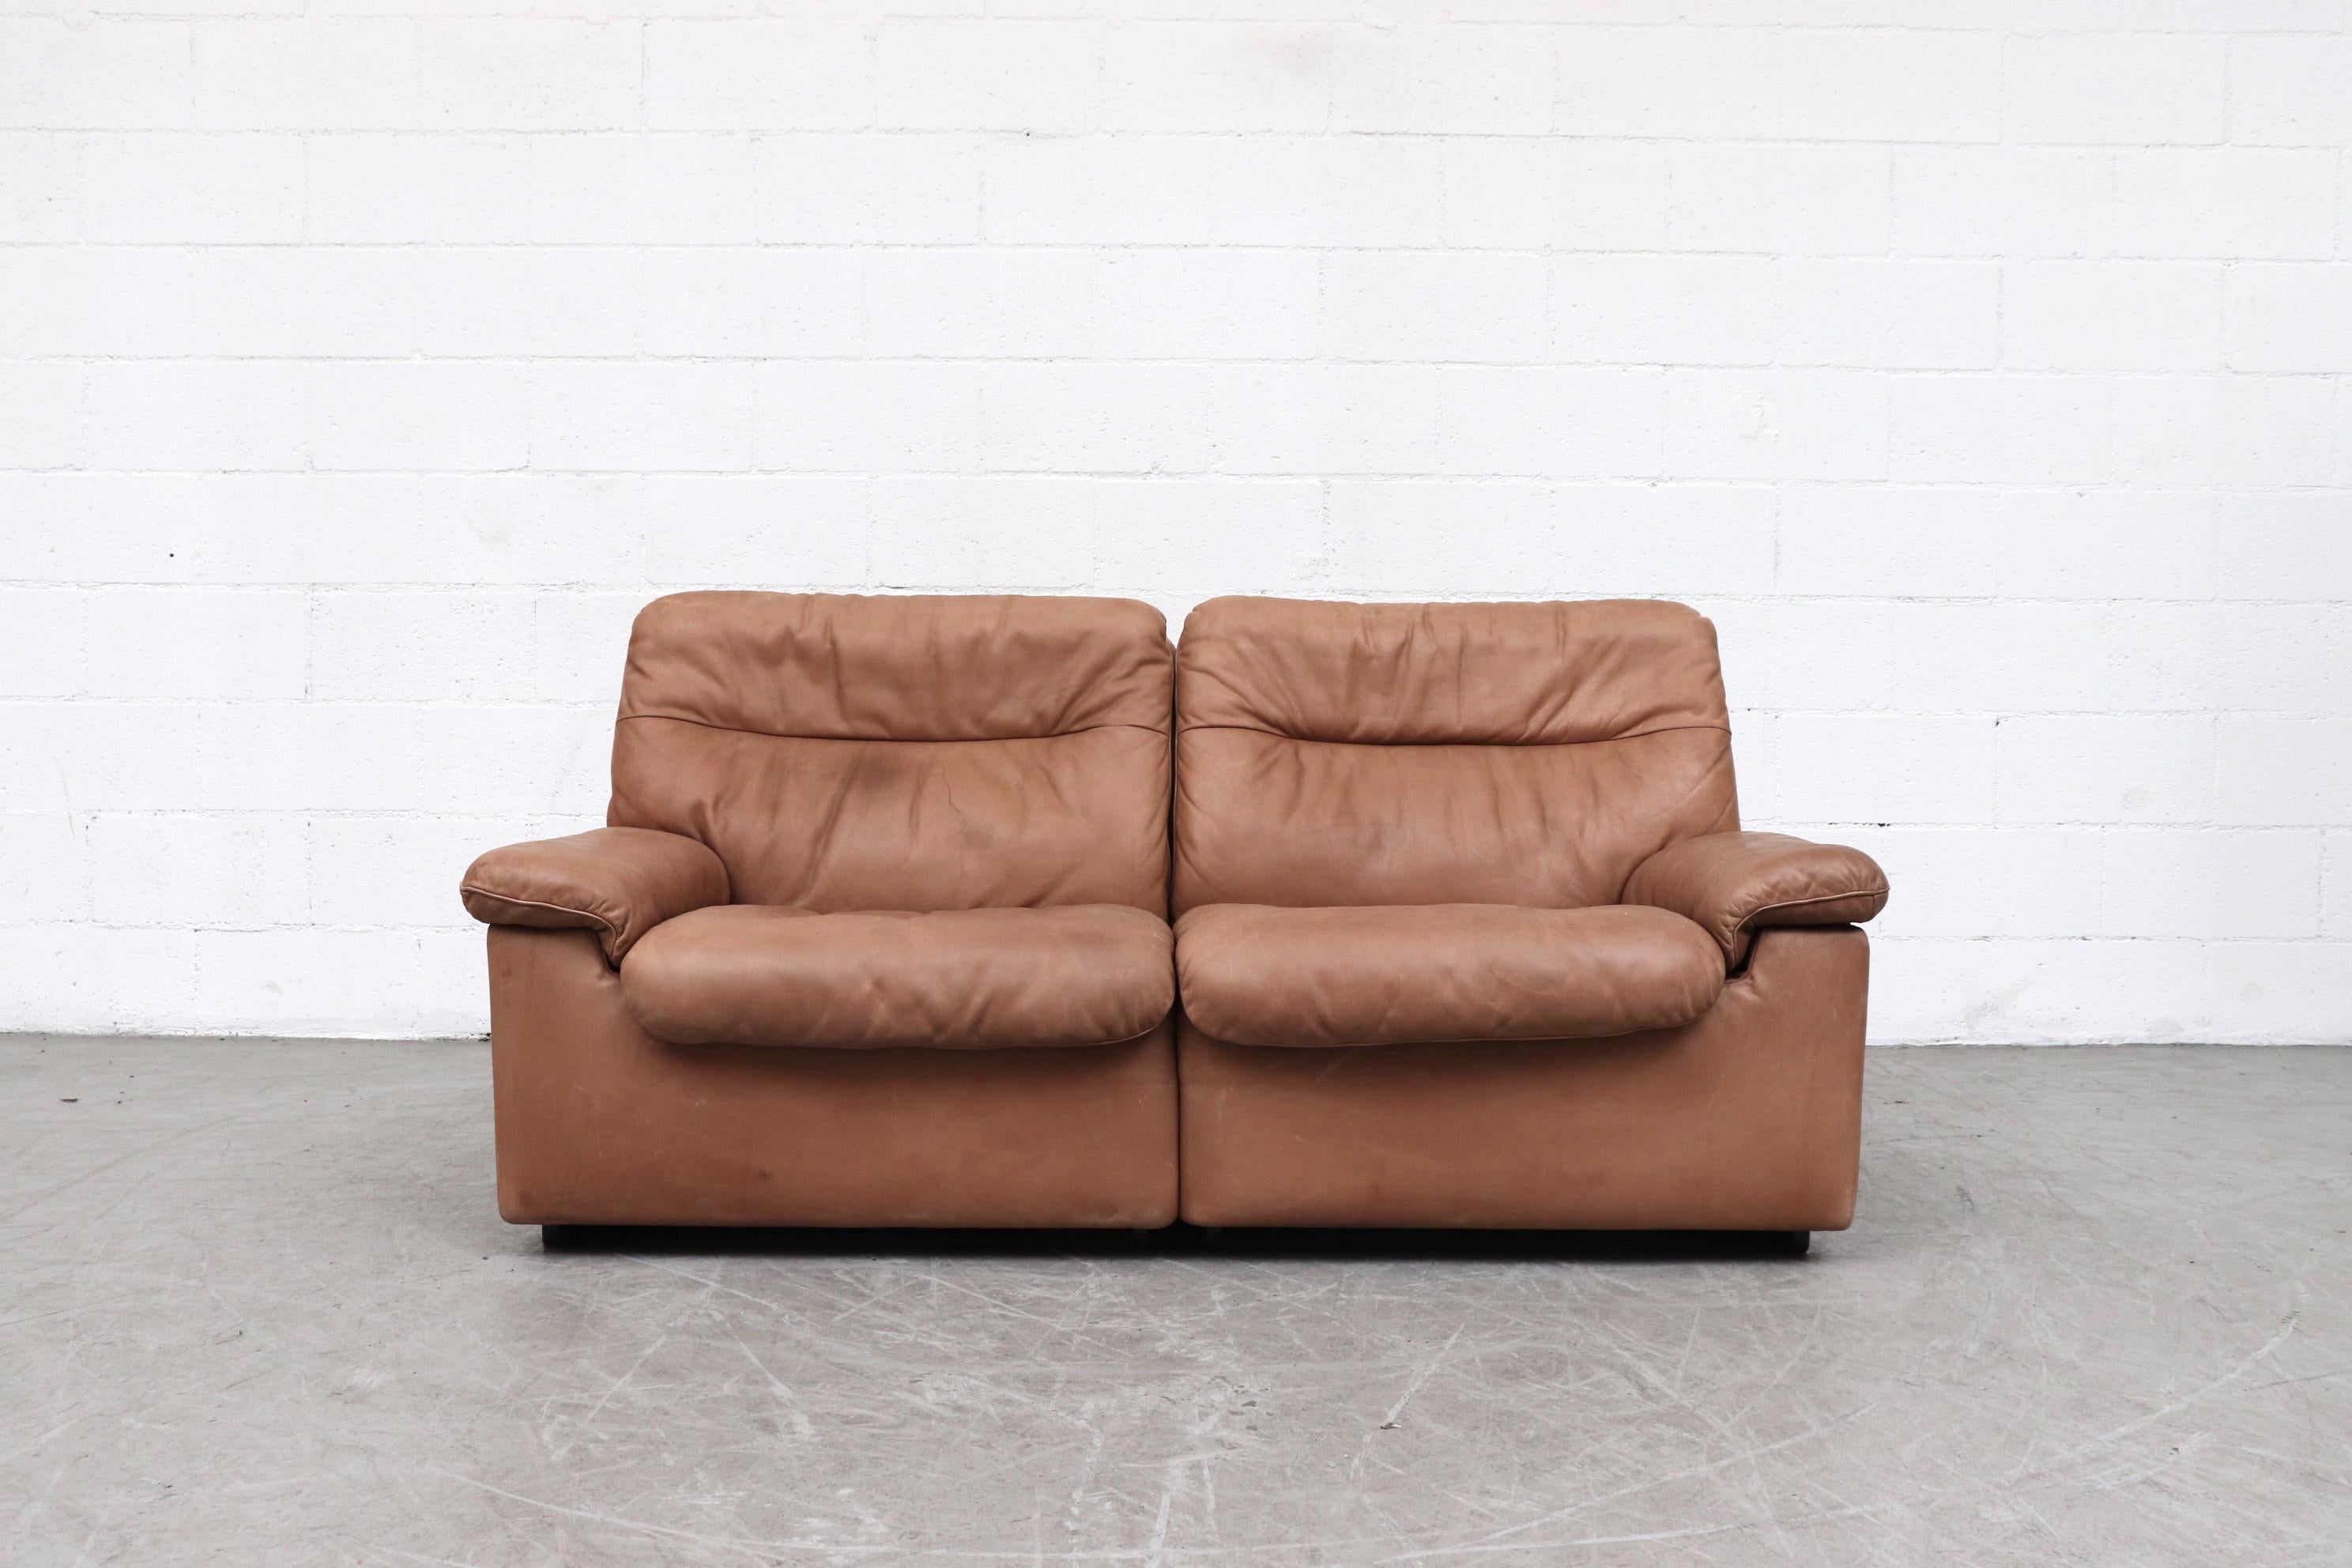 Handsome De Sede DS 66 natural leather loveseat. Thick light brown leather with nice patina. In original condition with visible signs of wear consistent with its age and use. Matching lounge chair (LU922413829891) and 3-Seat Sofa (LU922413830031)